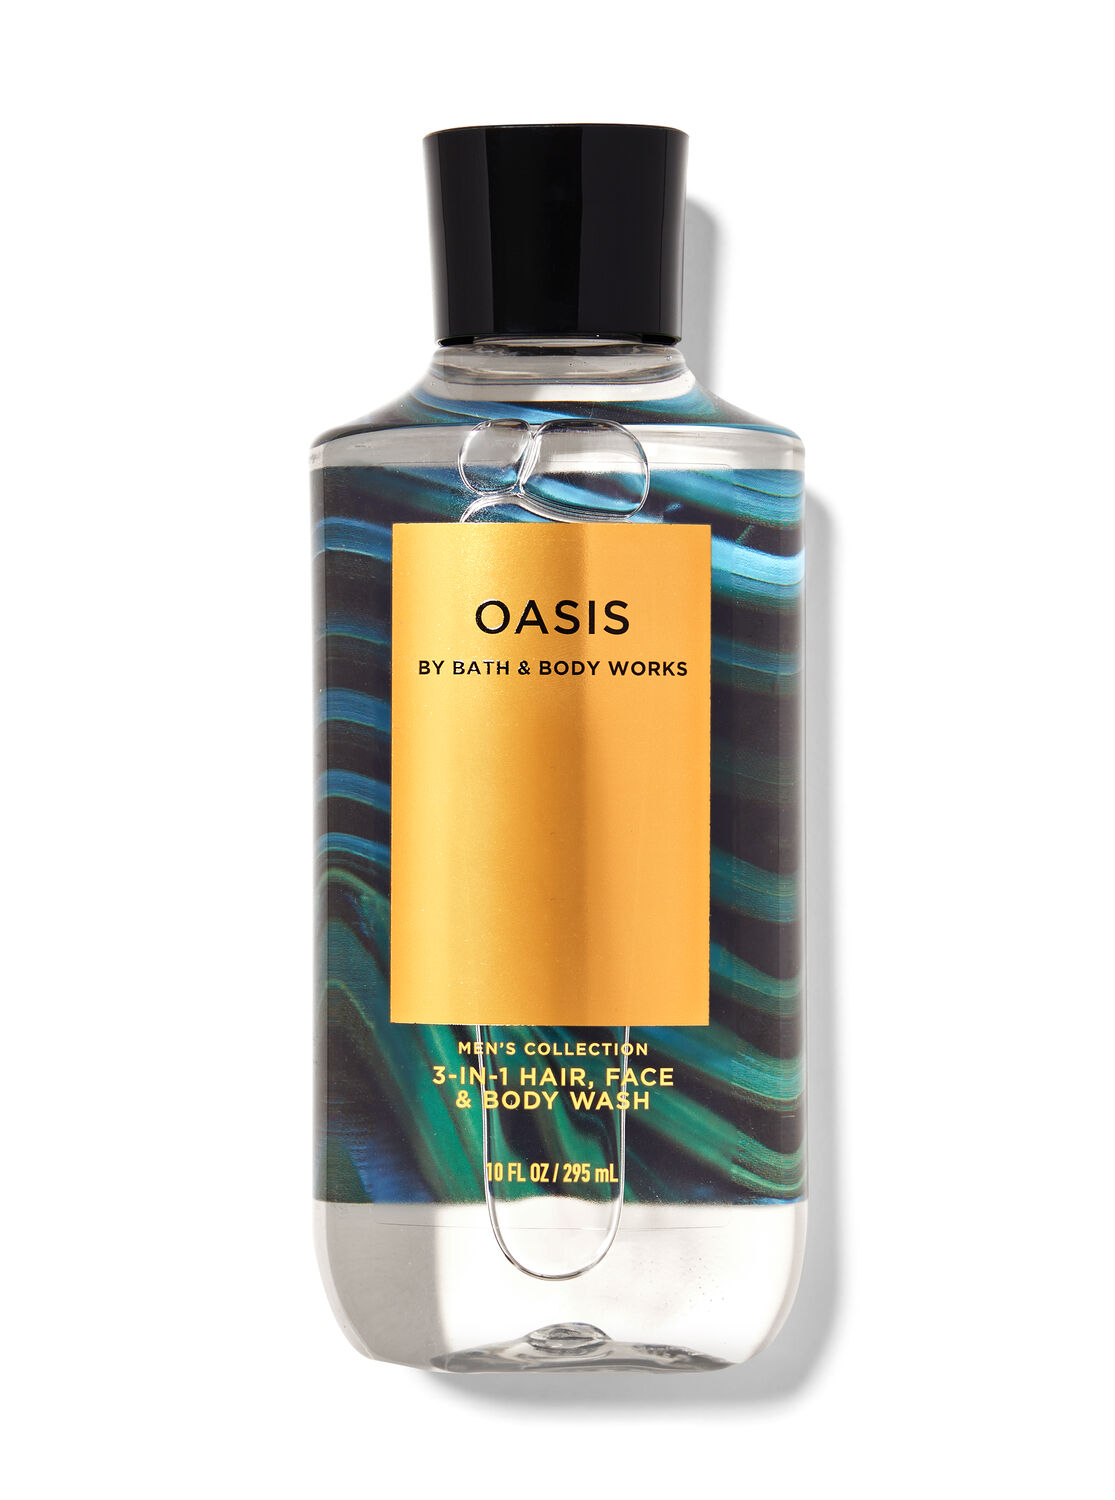 Oasis 3-in-1 Hair, Face & Body Wash